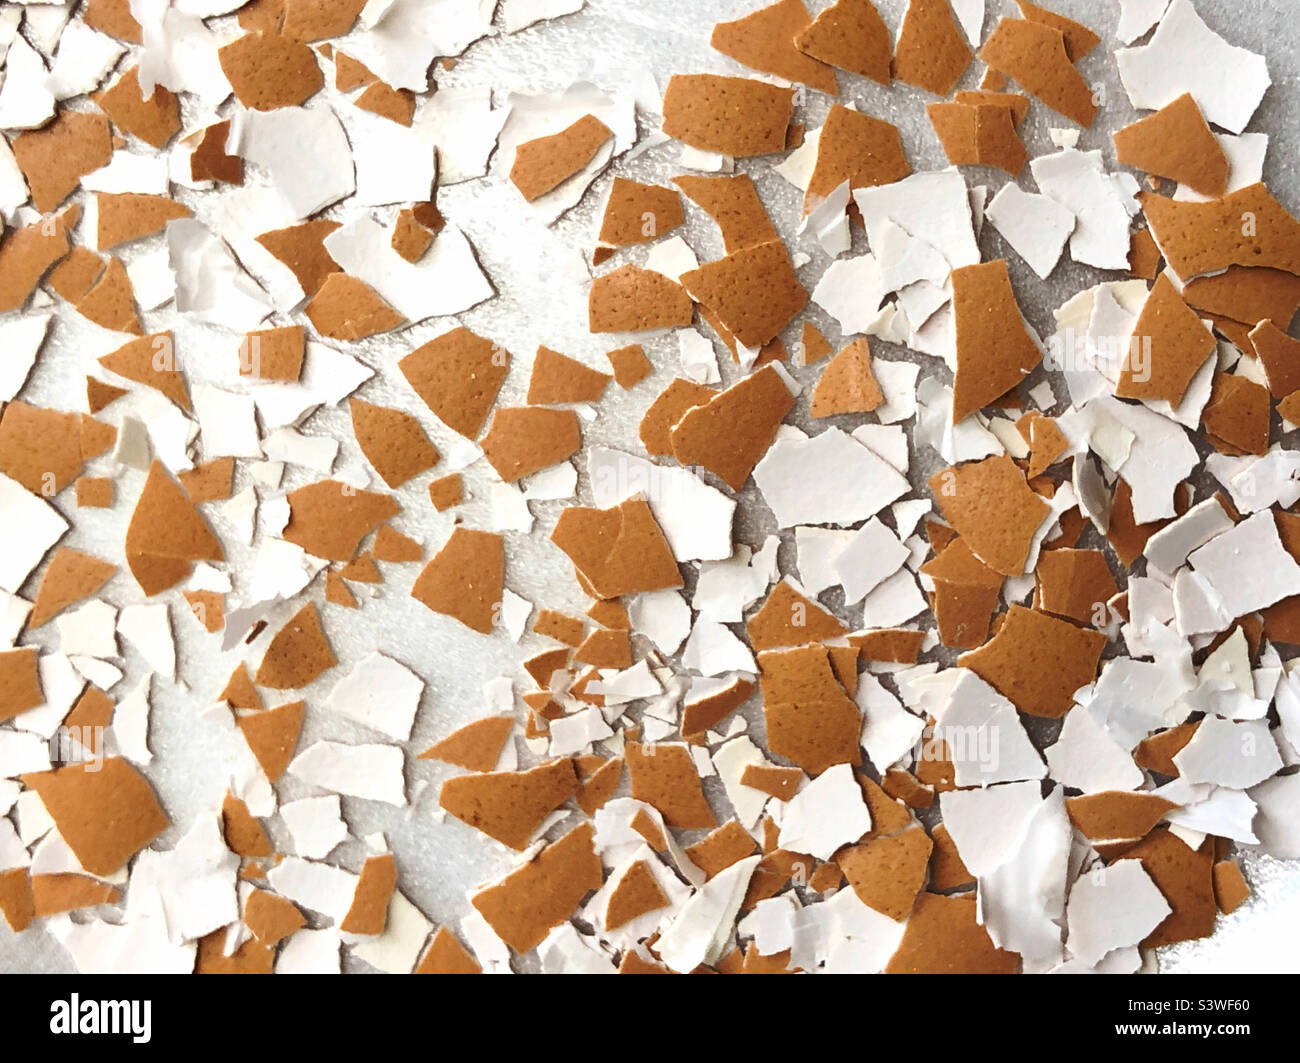 A background of crushed brown eggshells Stock Photo